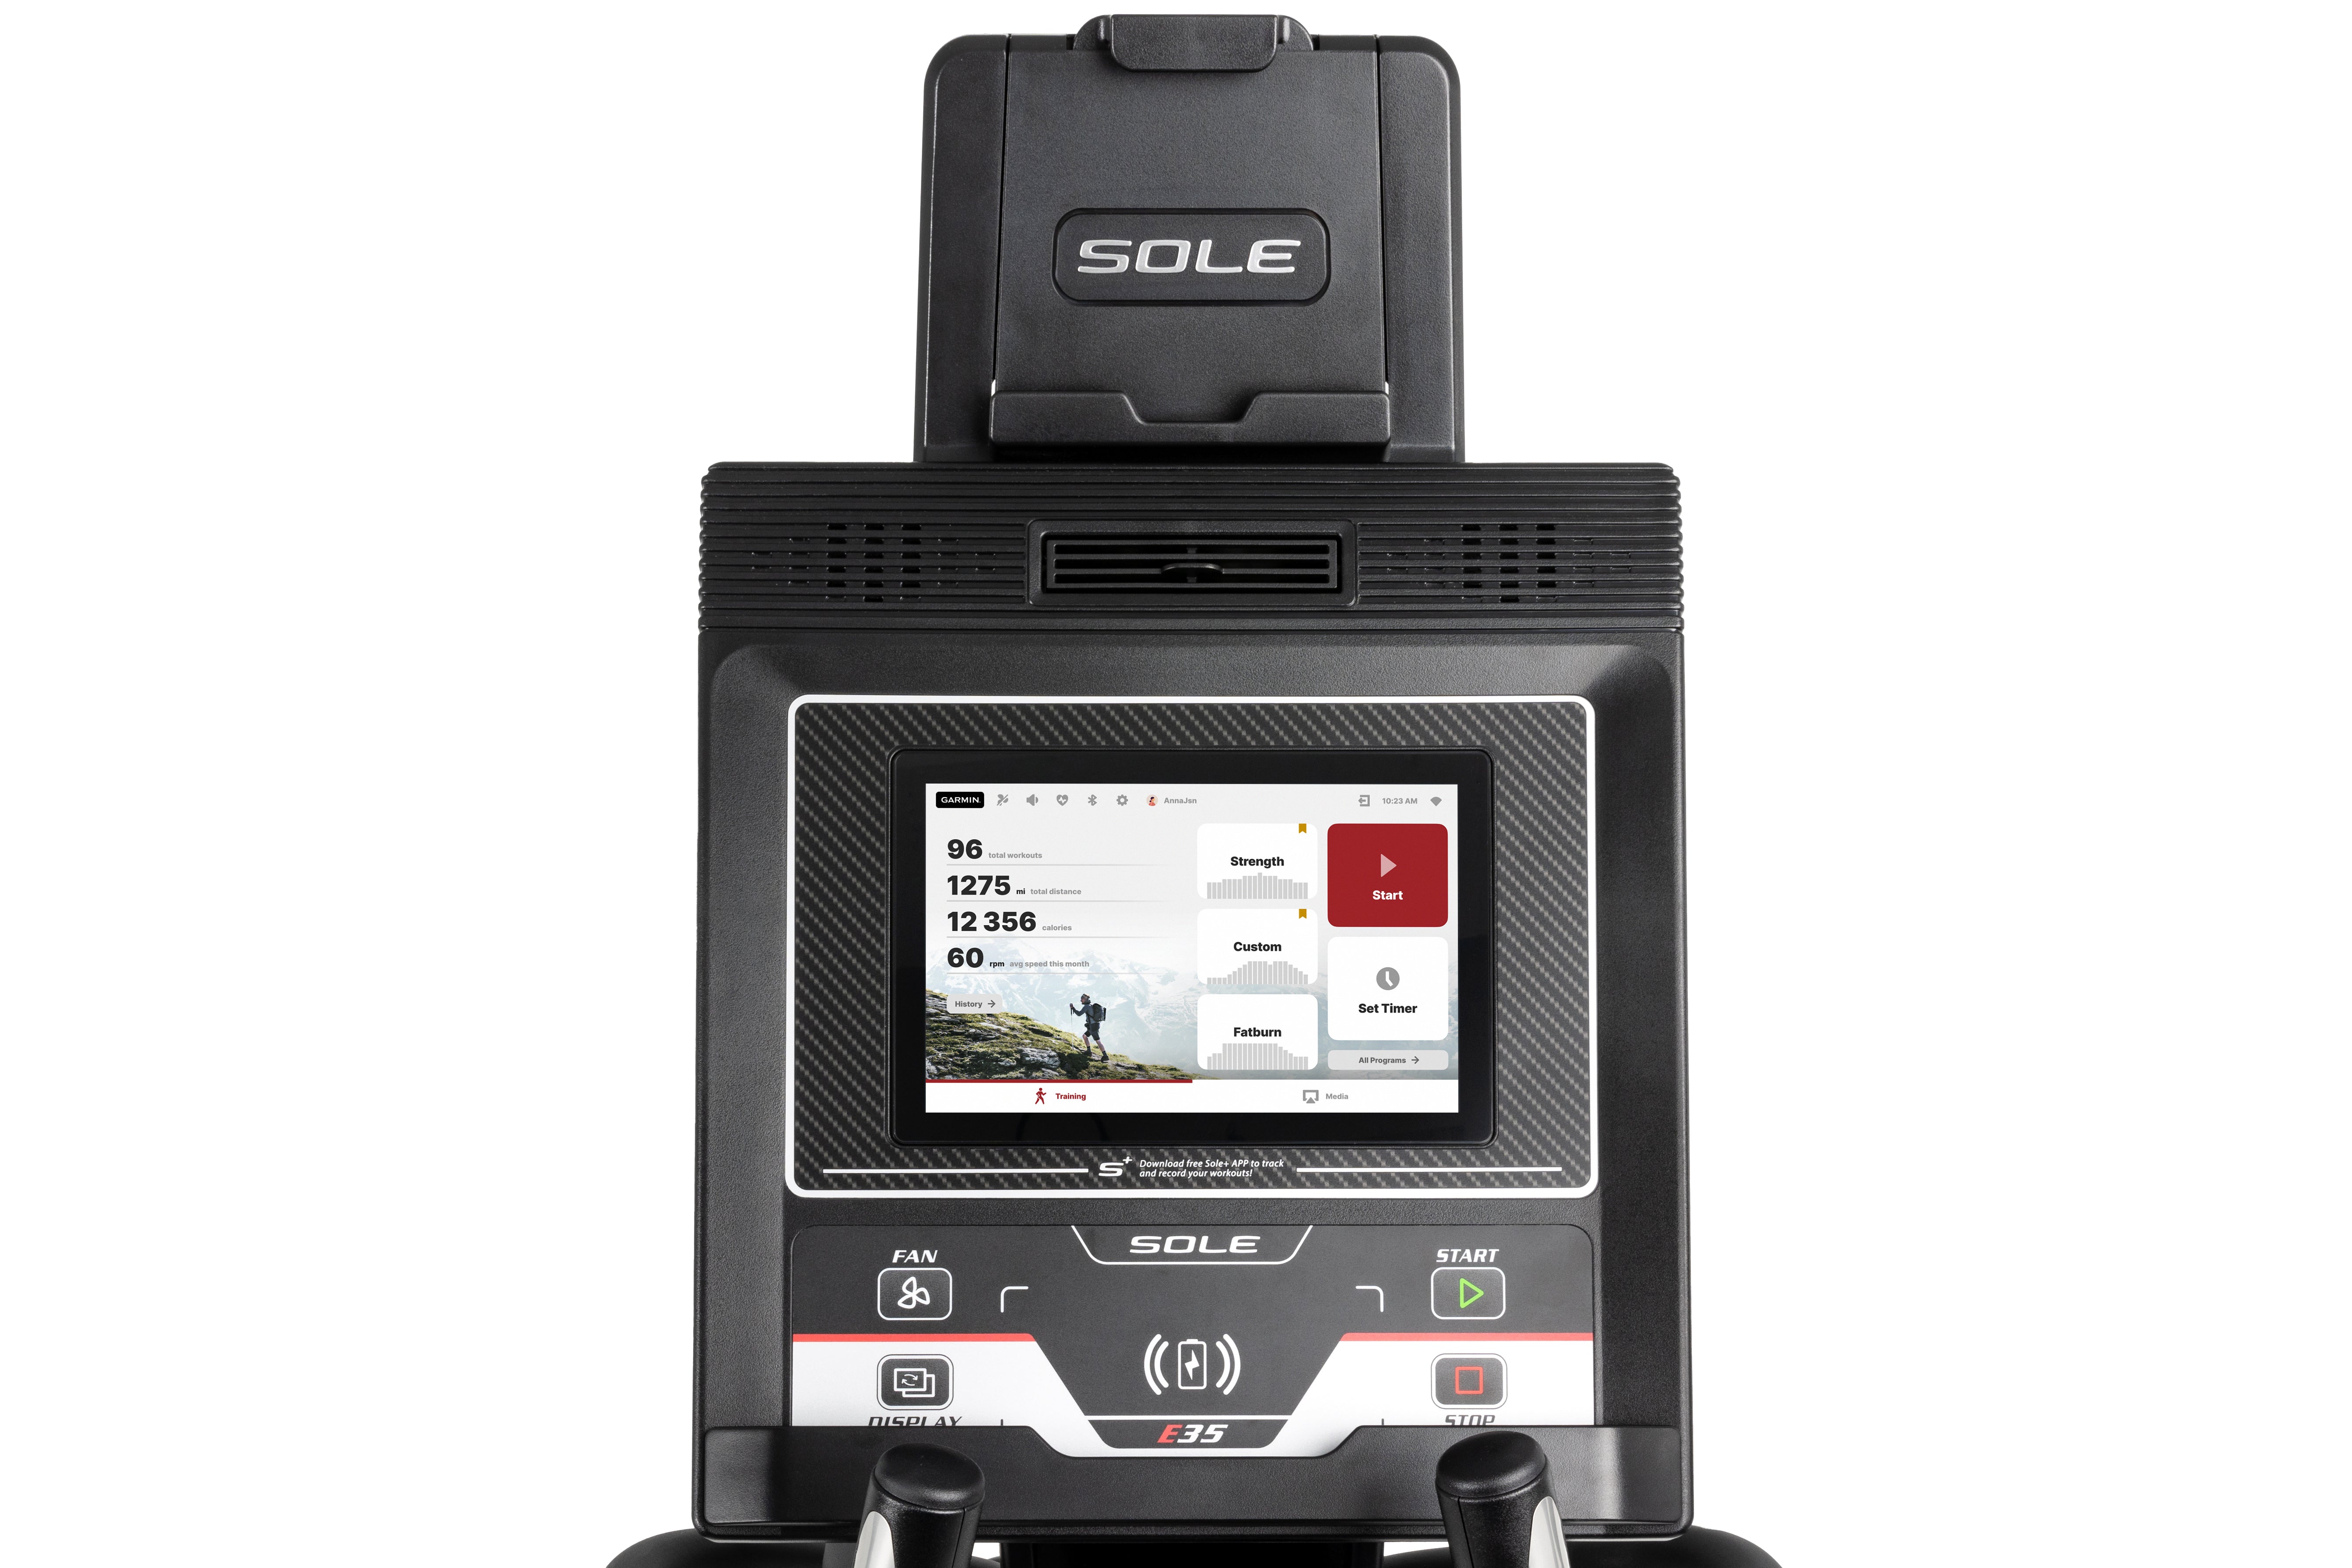 Front view of the Sole E35 elliptical's console, featuring a large digital touchscreen display that showcases workout metrics and a scenic running trail. The top houses a branded 'SOLE' tablet holder. The lower section displays easy-to-access buttons labeled 'START', 'STOP', and other controls, framed by a fan symbol and the 'E35' logo.